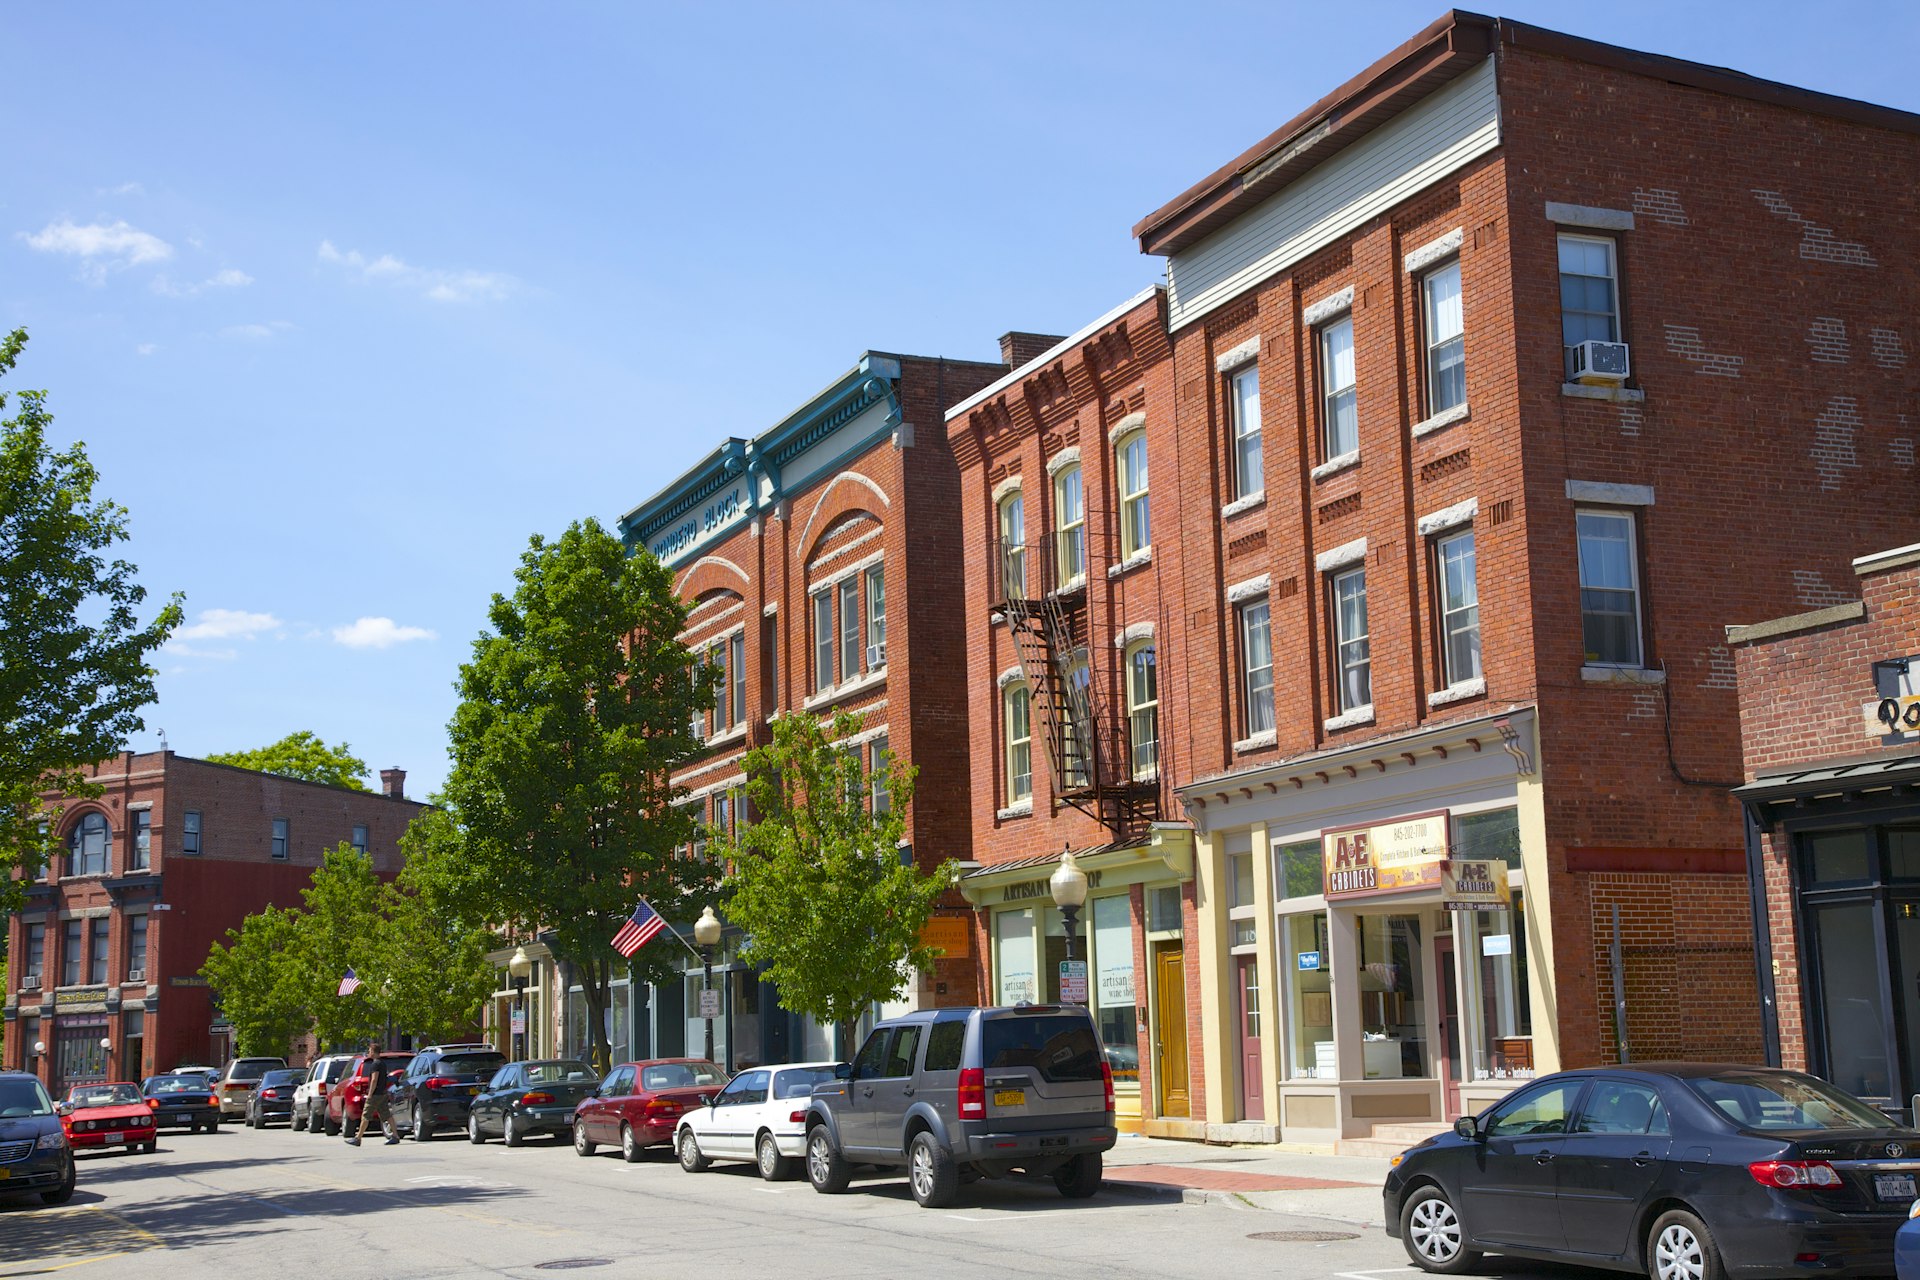 Main street with small brick buildings in Beacon, New York 